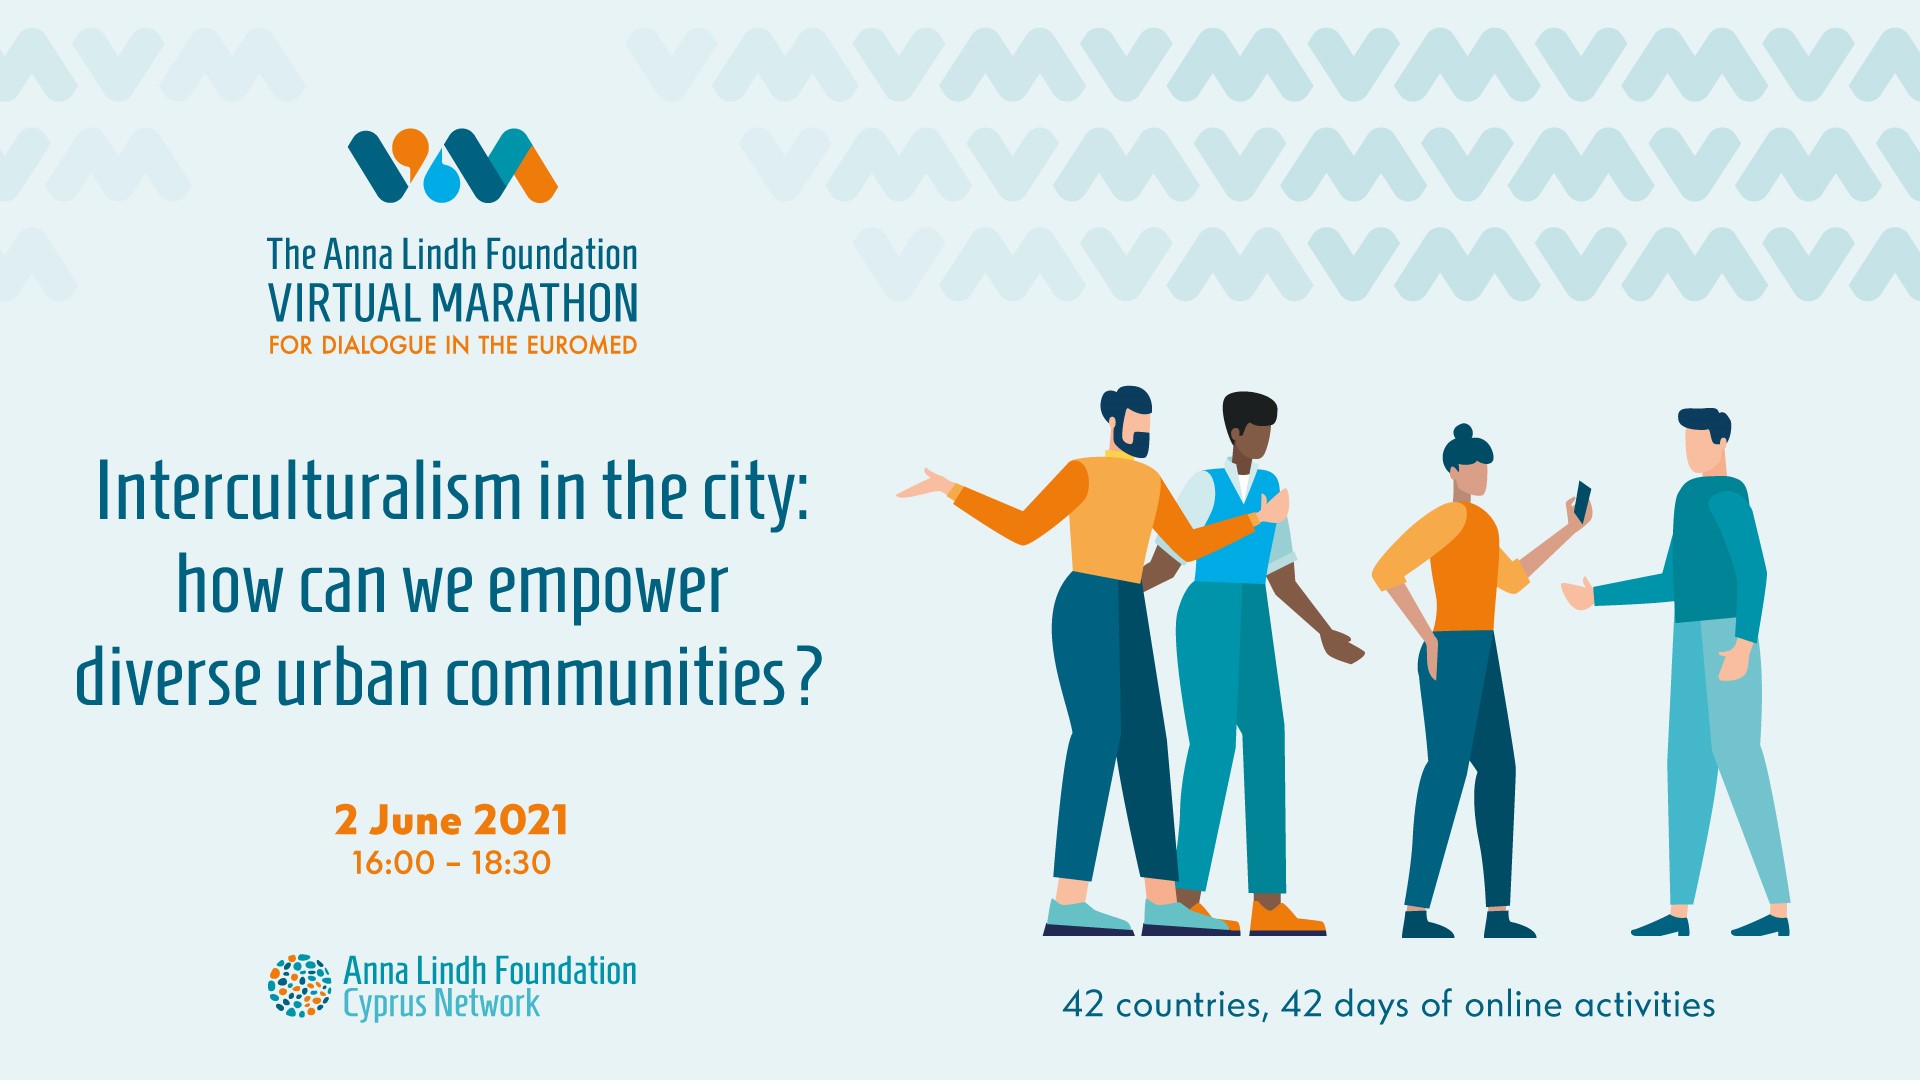 Interculturalism in the city: how can we empower diverse urban communities?